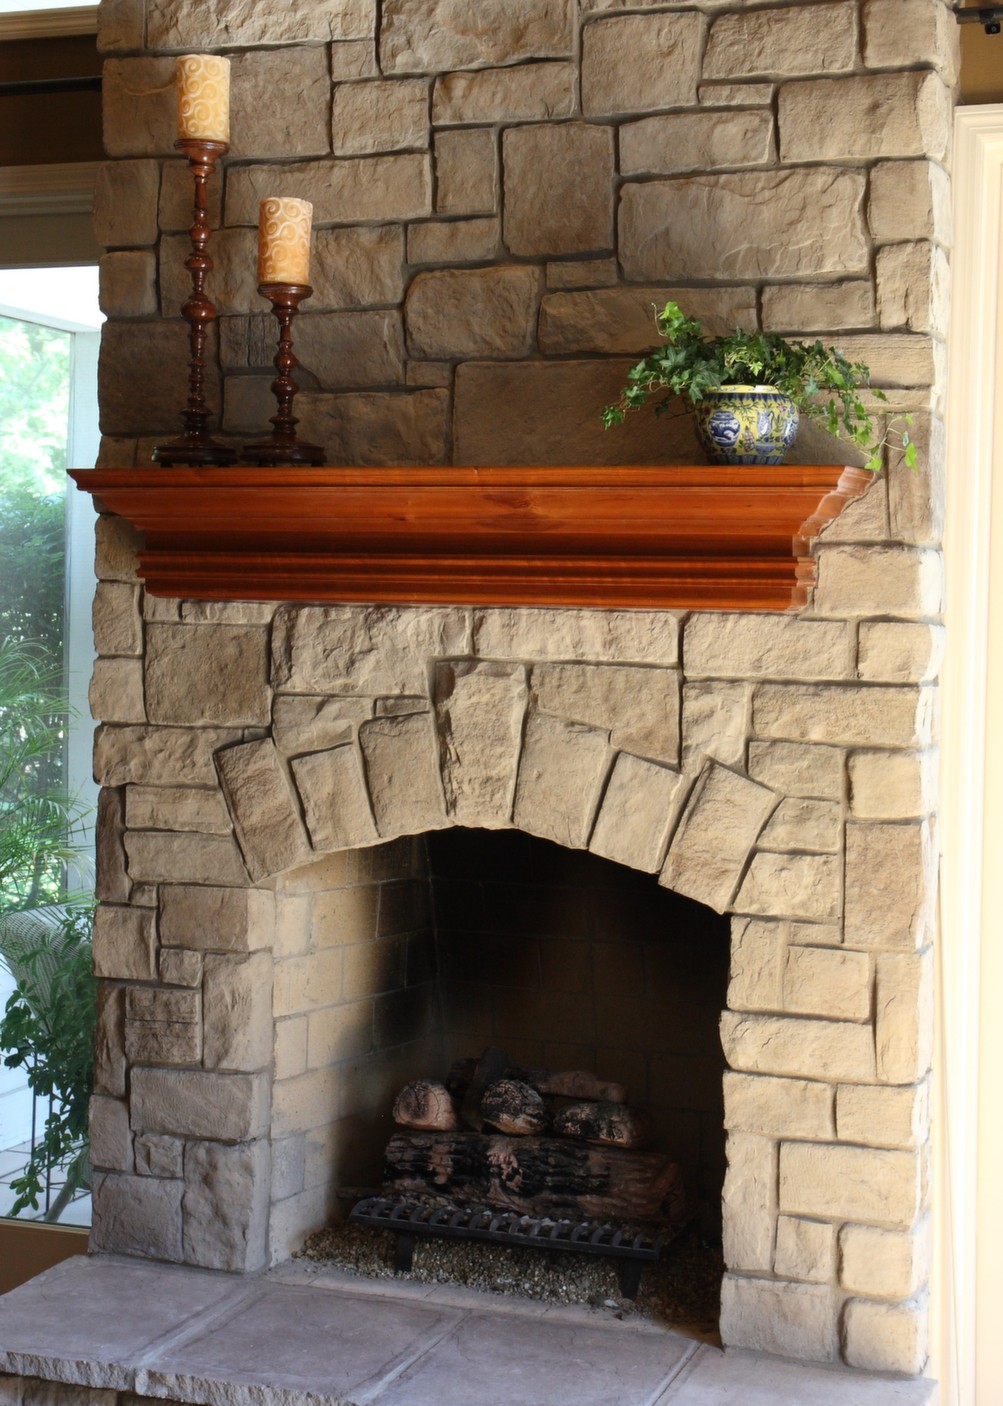 North Star Stone offers a wide range of stone for fireplaces with custom colors and styles to help you update and create a beautiful fireplace at a cost you can afford.